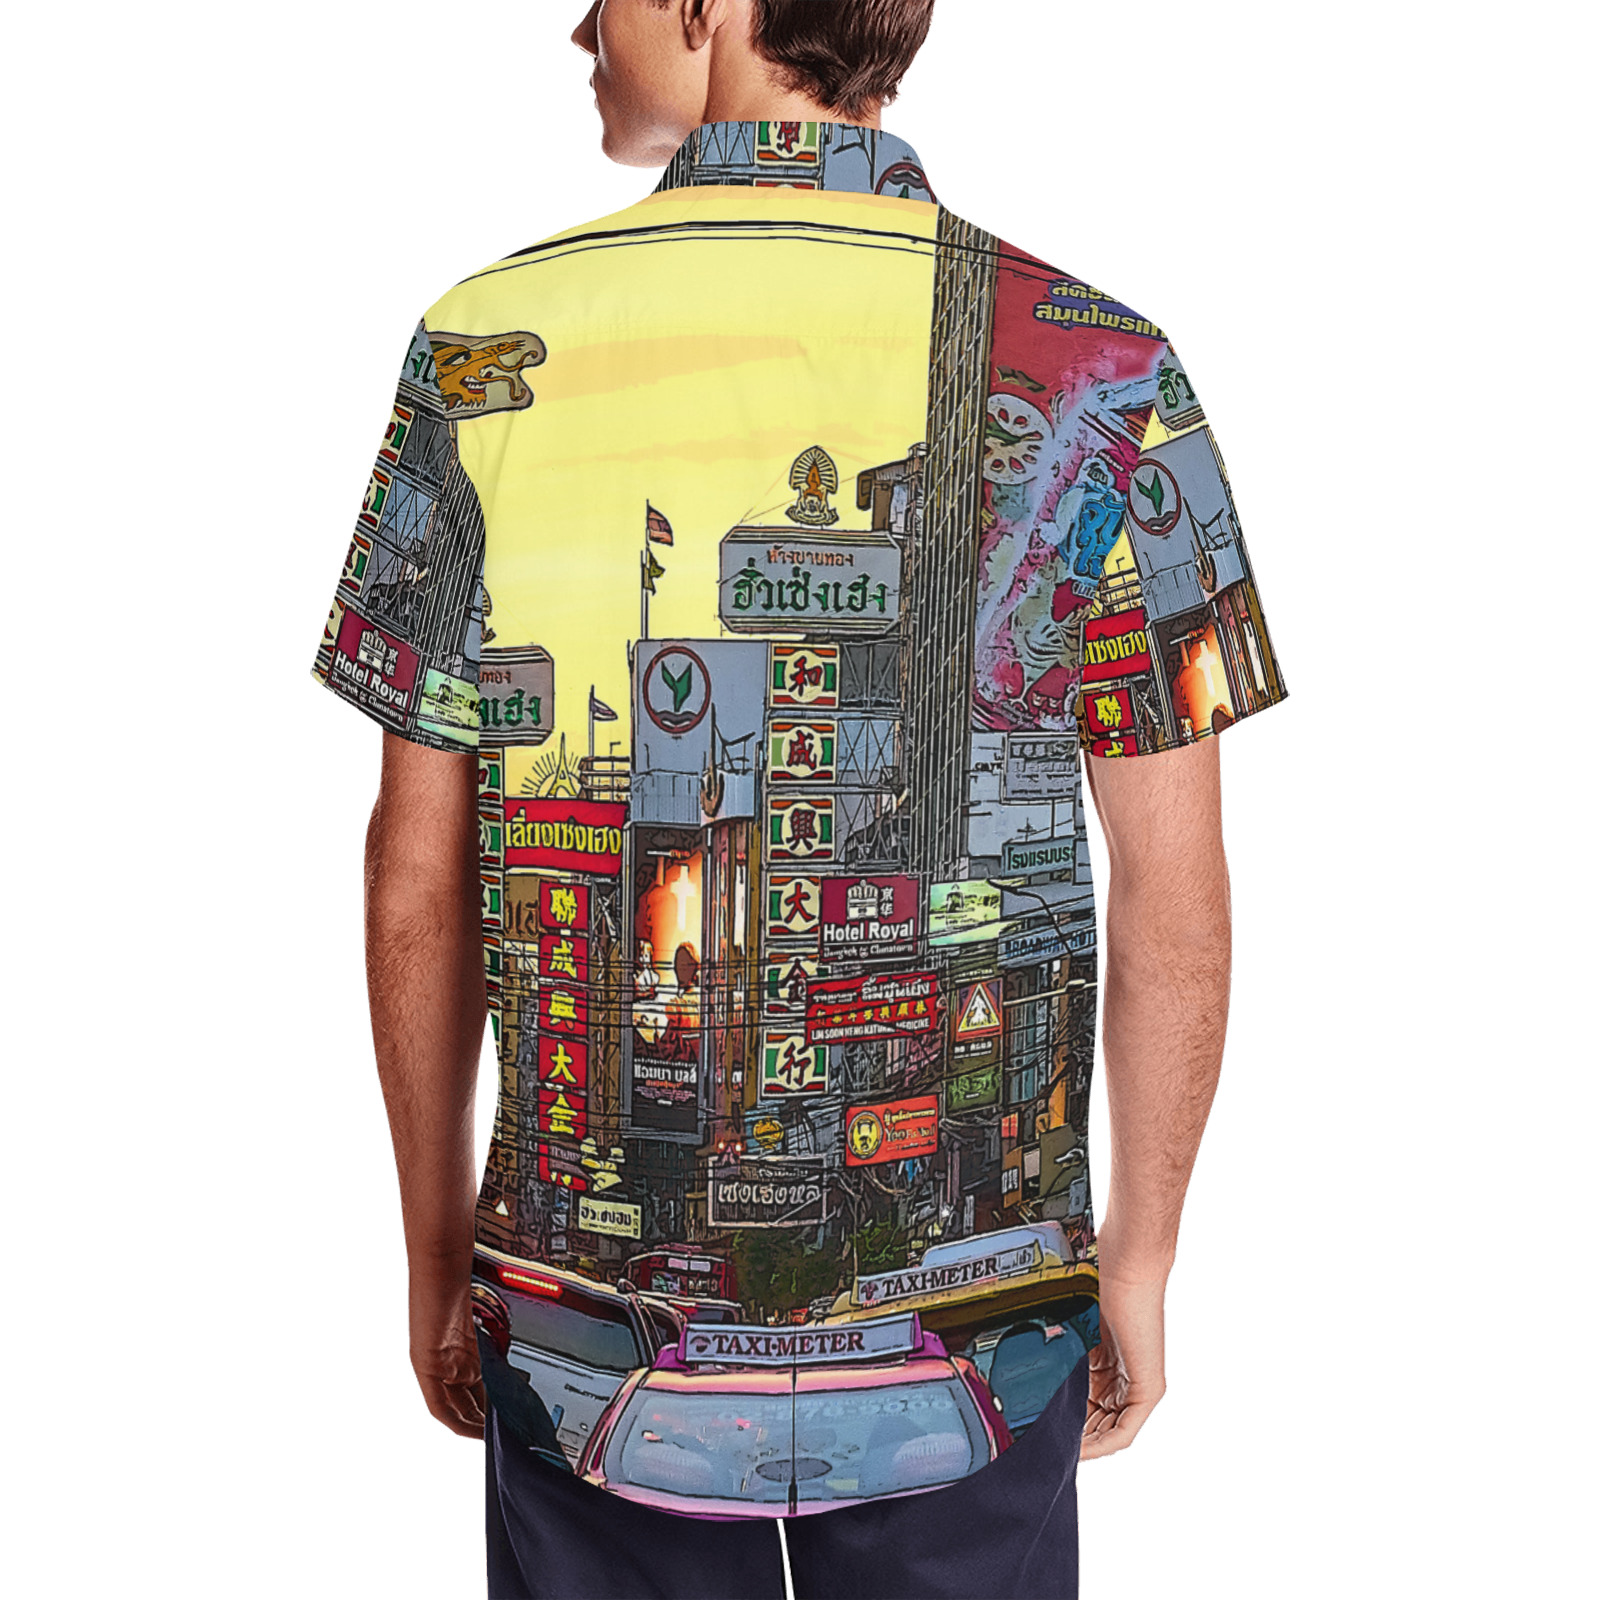 Chinatown in Bangkok Thailand - Altered Photo Men's Short Sleeve Shirt with Lapel Collar (Model T54)